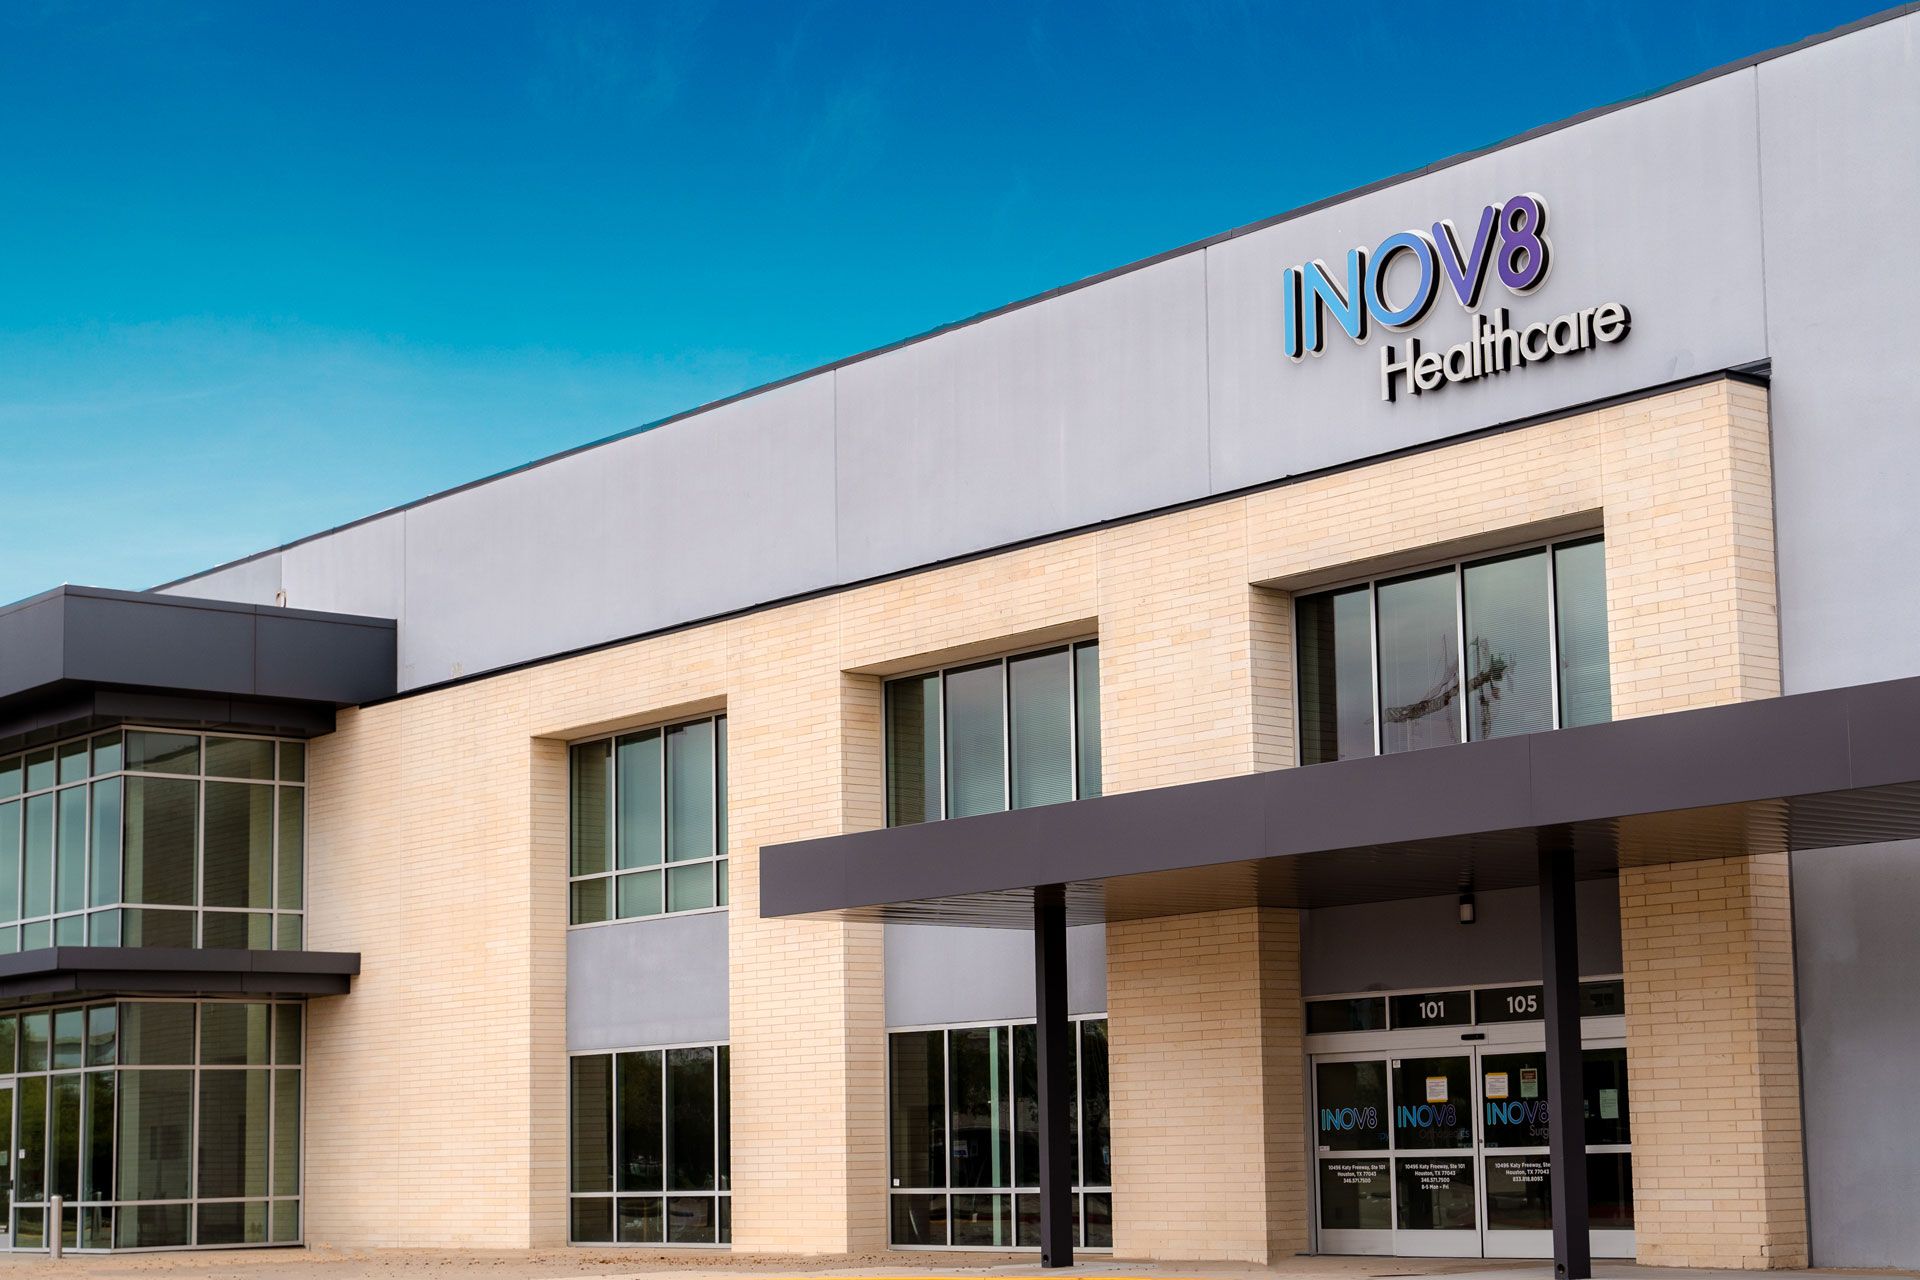 Inov8 Surgical building